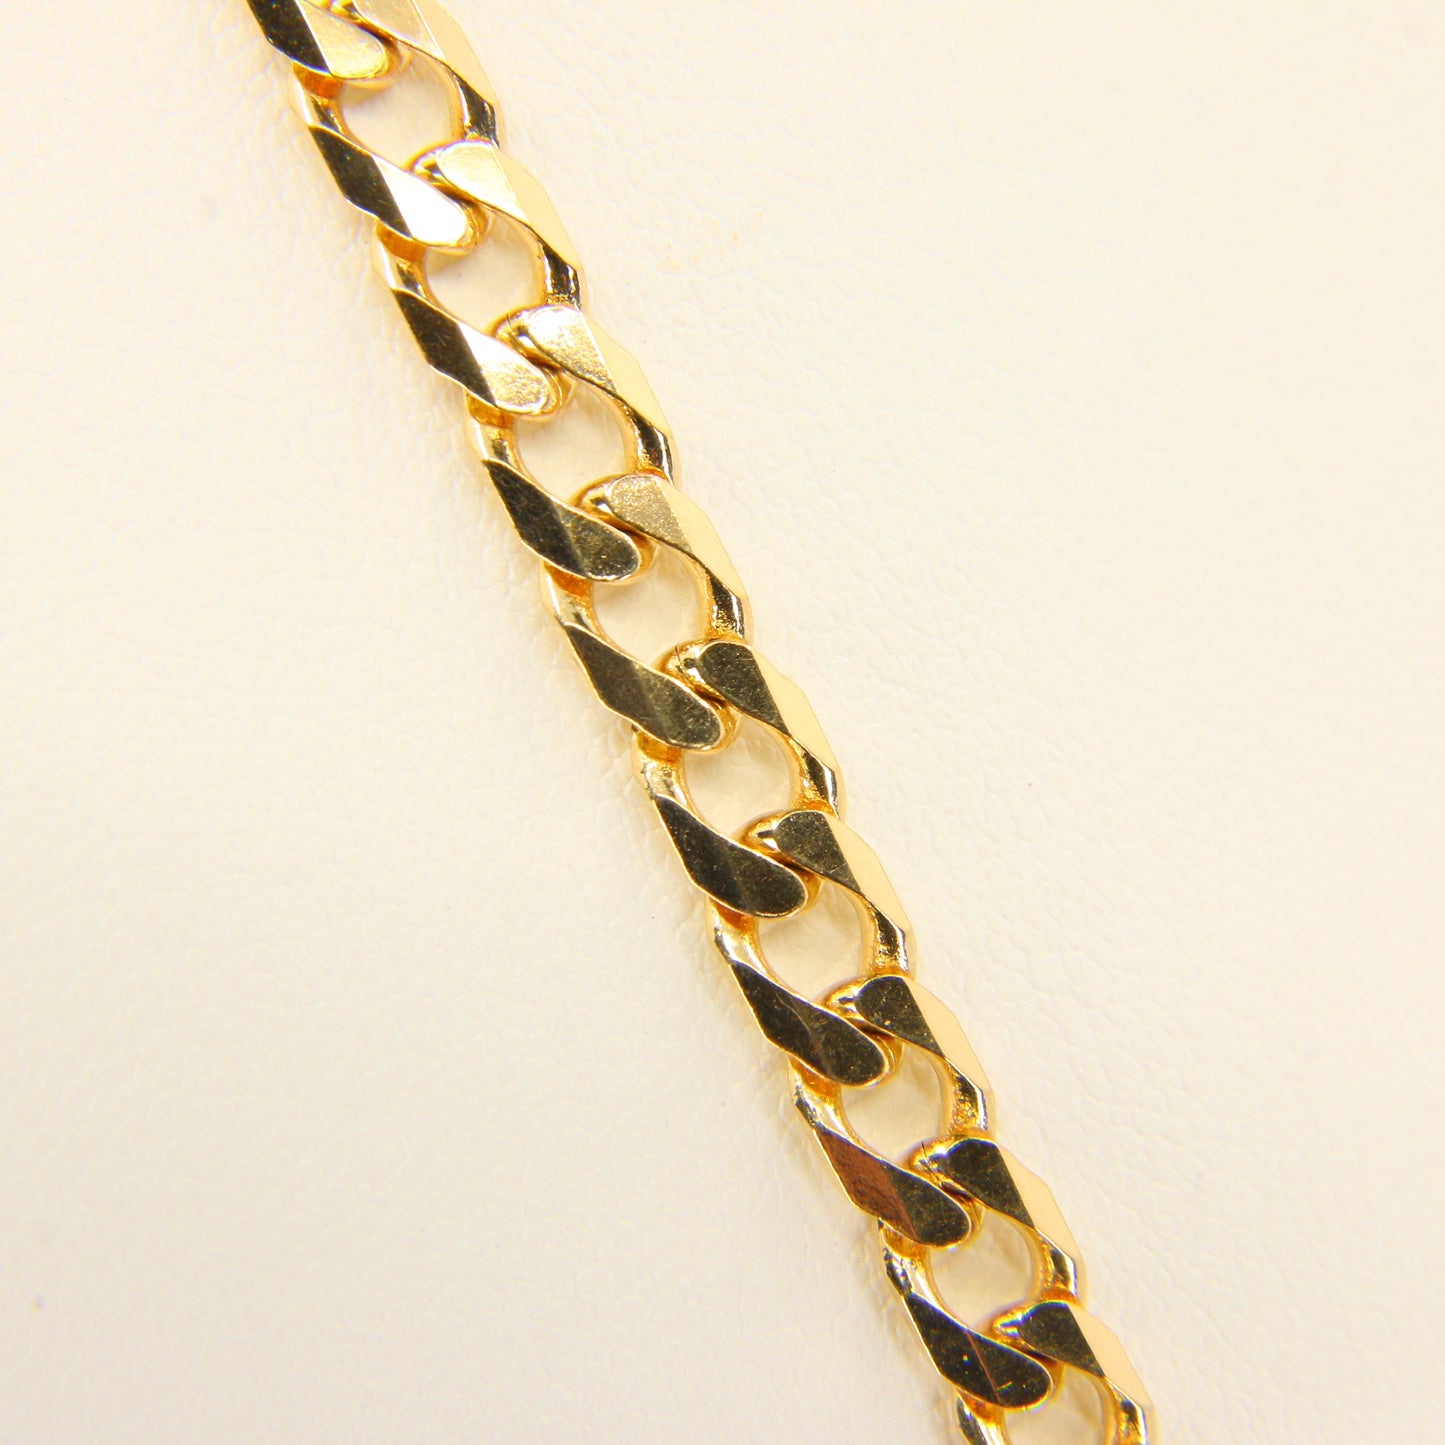 Vintage 9ct Heavy Solid Gold Chain Necklace Hallmarked Yellow Gold